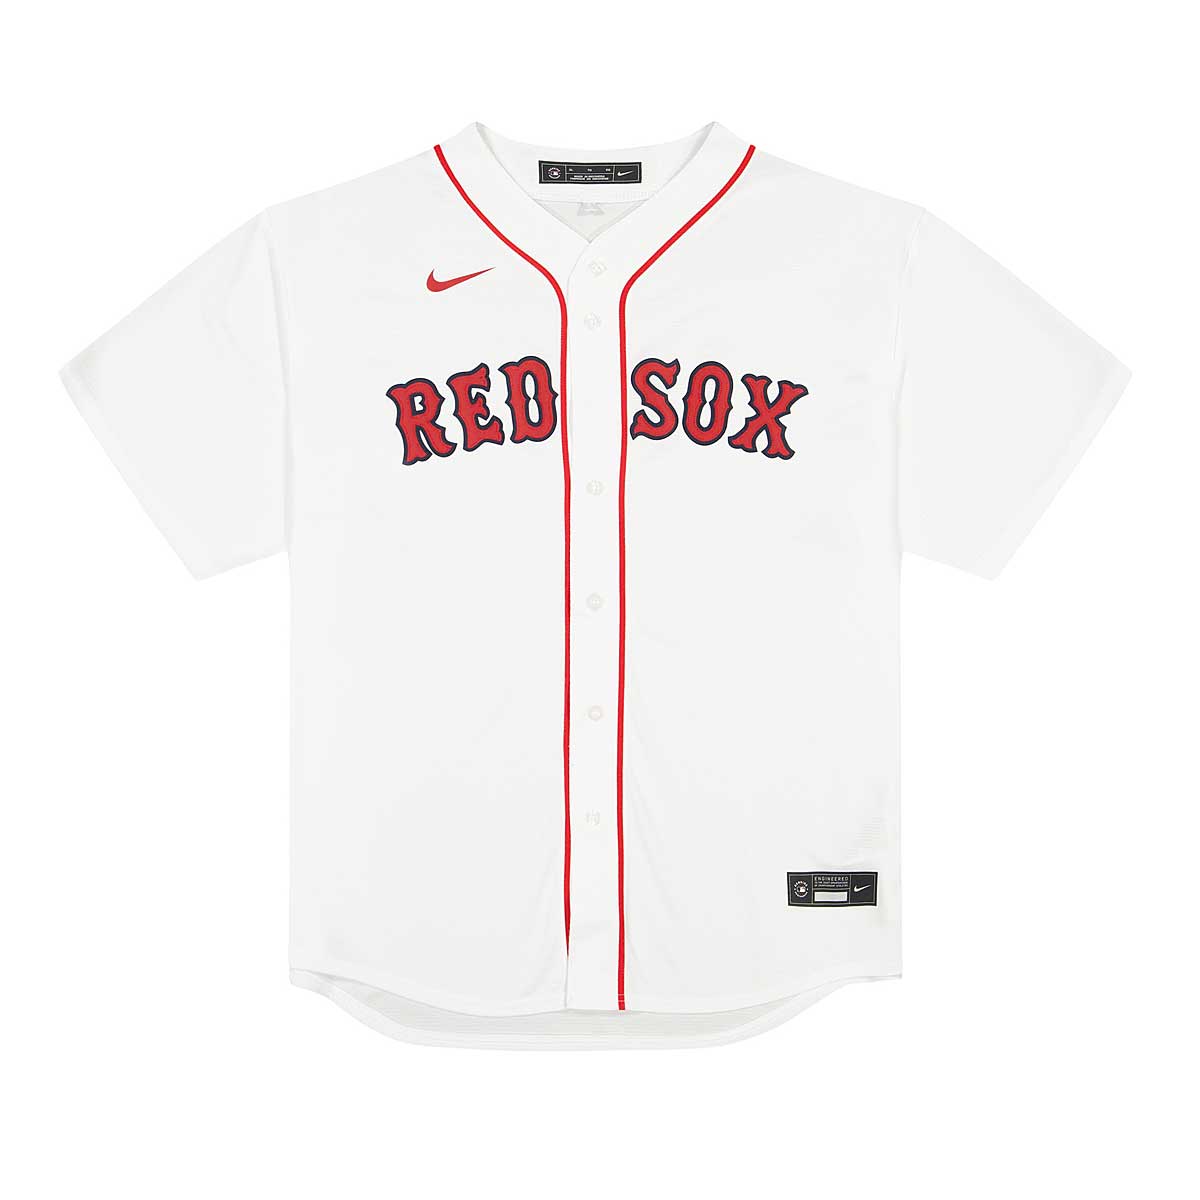 Fanatics Mlb Official Replica Home Jersey Boston Red Sox, White/Red Red Sox